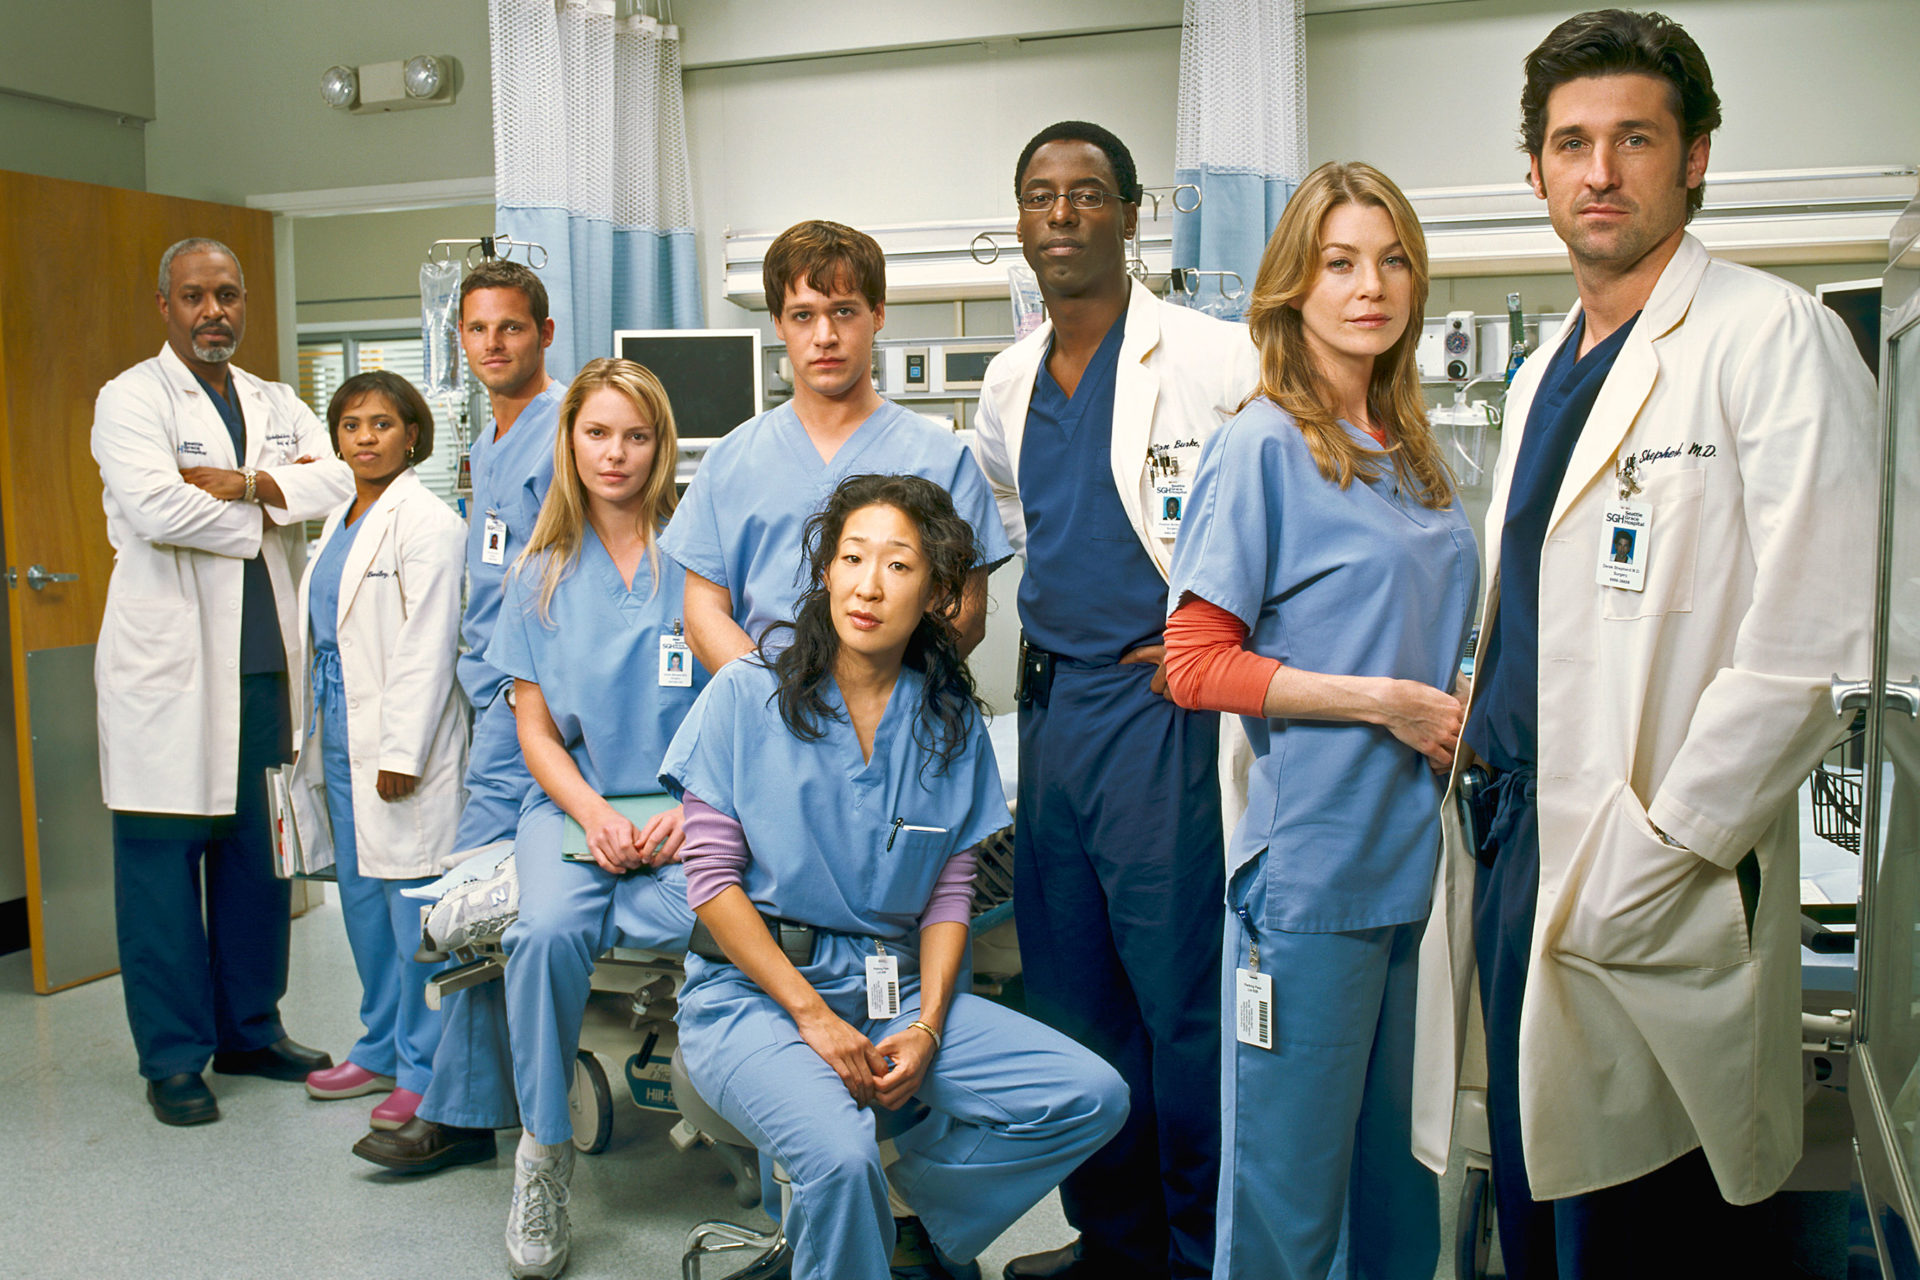 UNITED STATES - JANUARY 23:  101962_R003_0033 -- GREY'S ANATOMY - "Grey's Anatomy" focuses on young people struggling to be doctors and doctors struggling to stay human. It's the drama and intensity of medical training mixed with the funny, sexy, painful lives of interns who are about to discover that neither medicine nor relationships can be defined in black and white. Real life only comes in shades of grey.  (Photo by Frank Ockenfels/ABC via Getty Images)